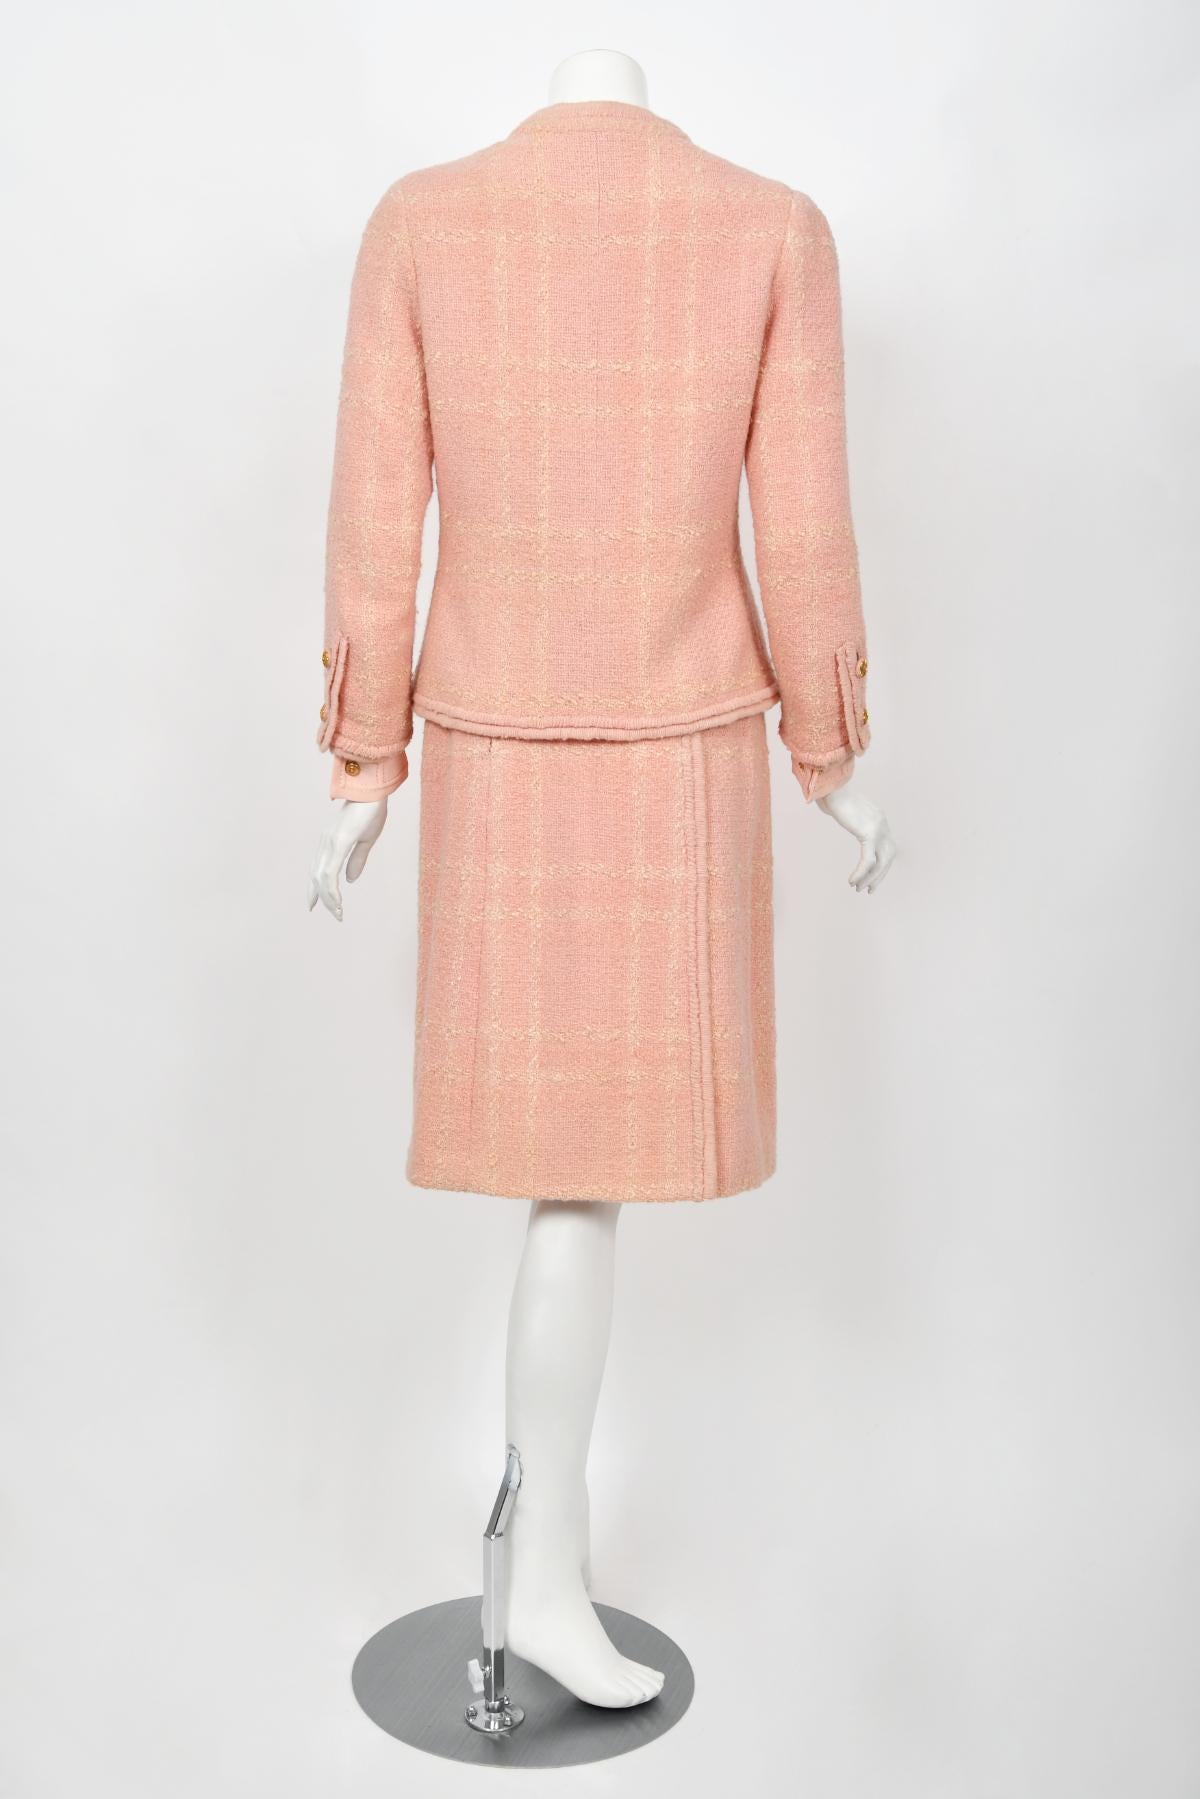 Vintage 1973 Chanel Haute Couture Documented Pink Wool Jacket Blouse Skirt Suit For Sale 12